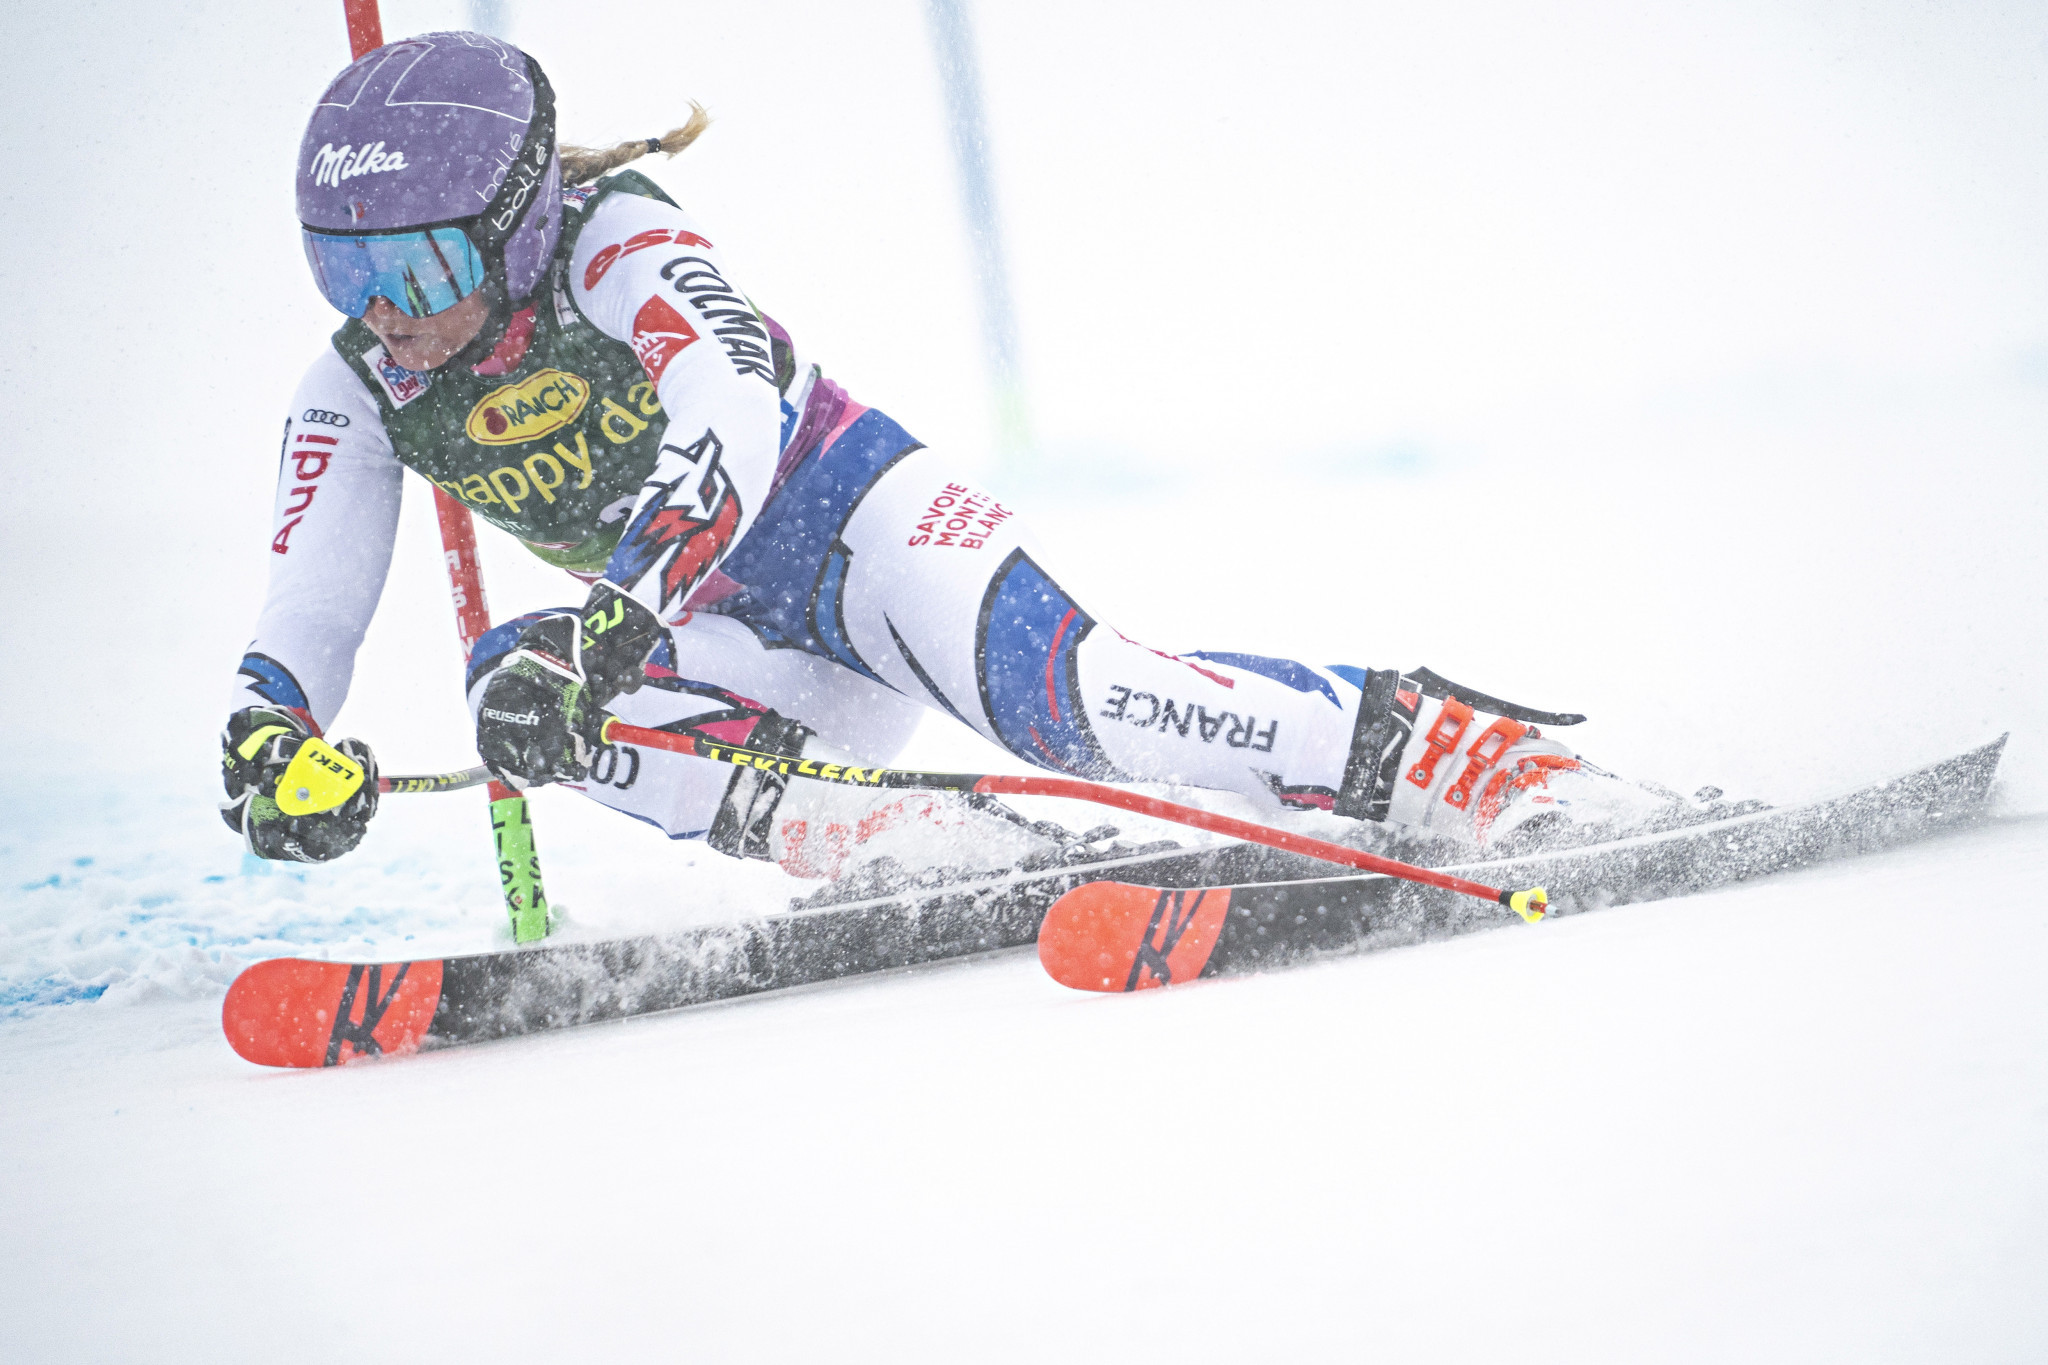 Worley secures giant slalom victory on opening day of Alpine Skiing World Cup season